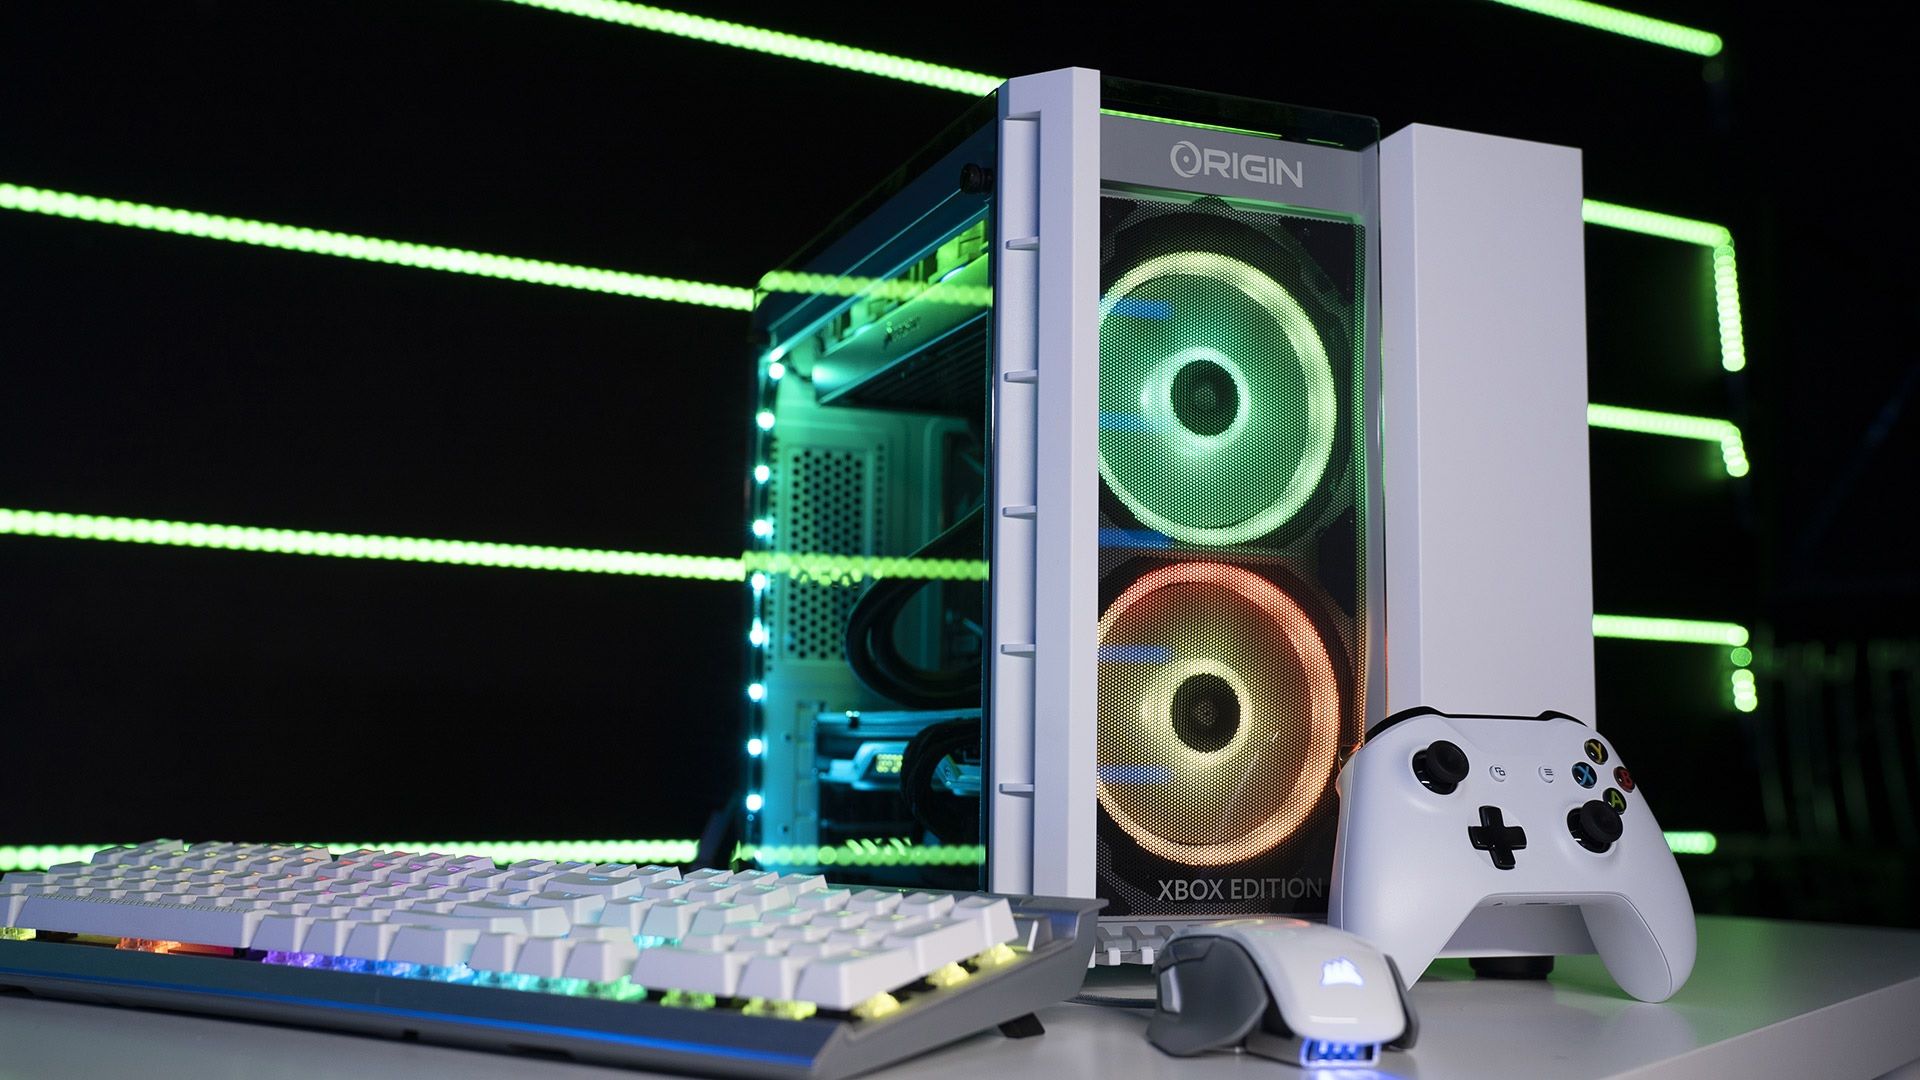 This custom gaming rig merges a PC and PS4 Pro or Xbox One S into the same case image 1